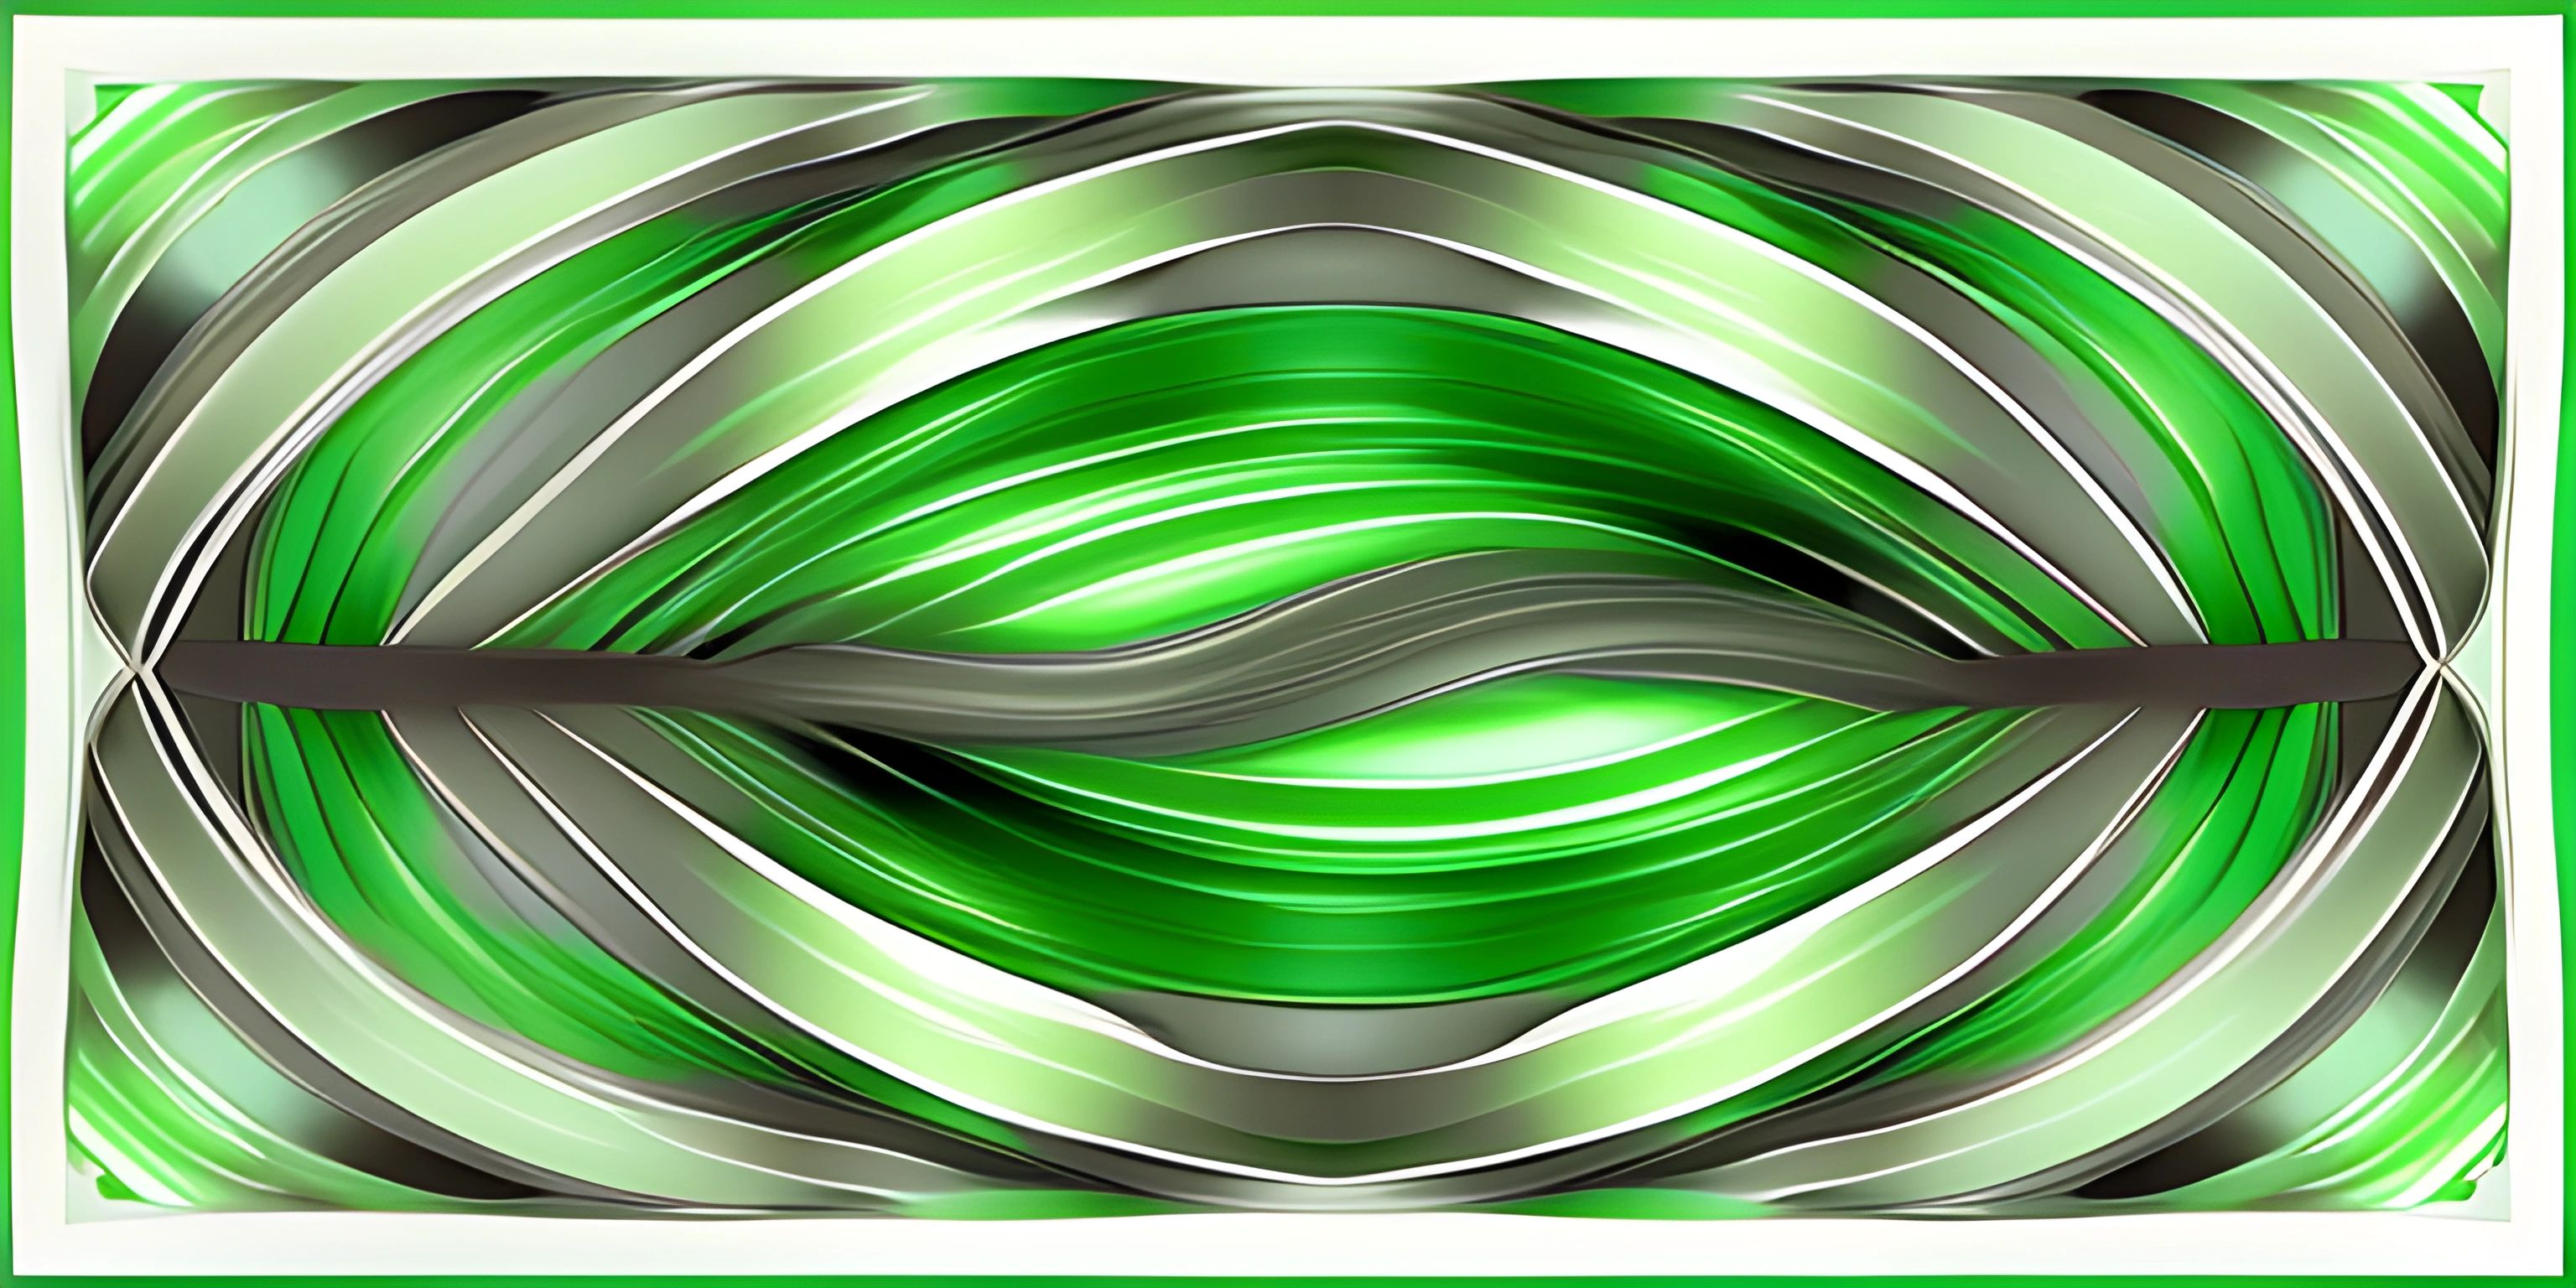 a large green abstract wall decoration with lines in the background photograph - art print by panoramic images